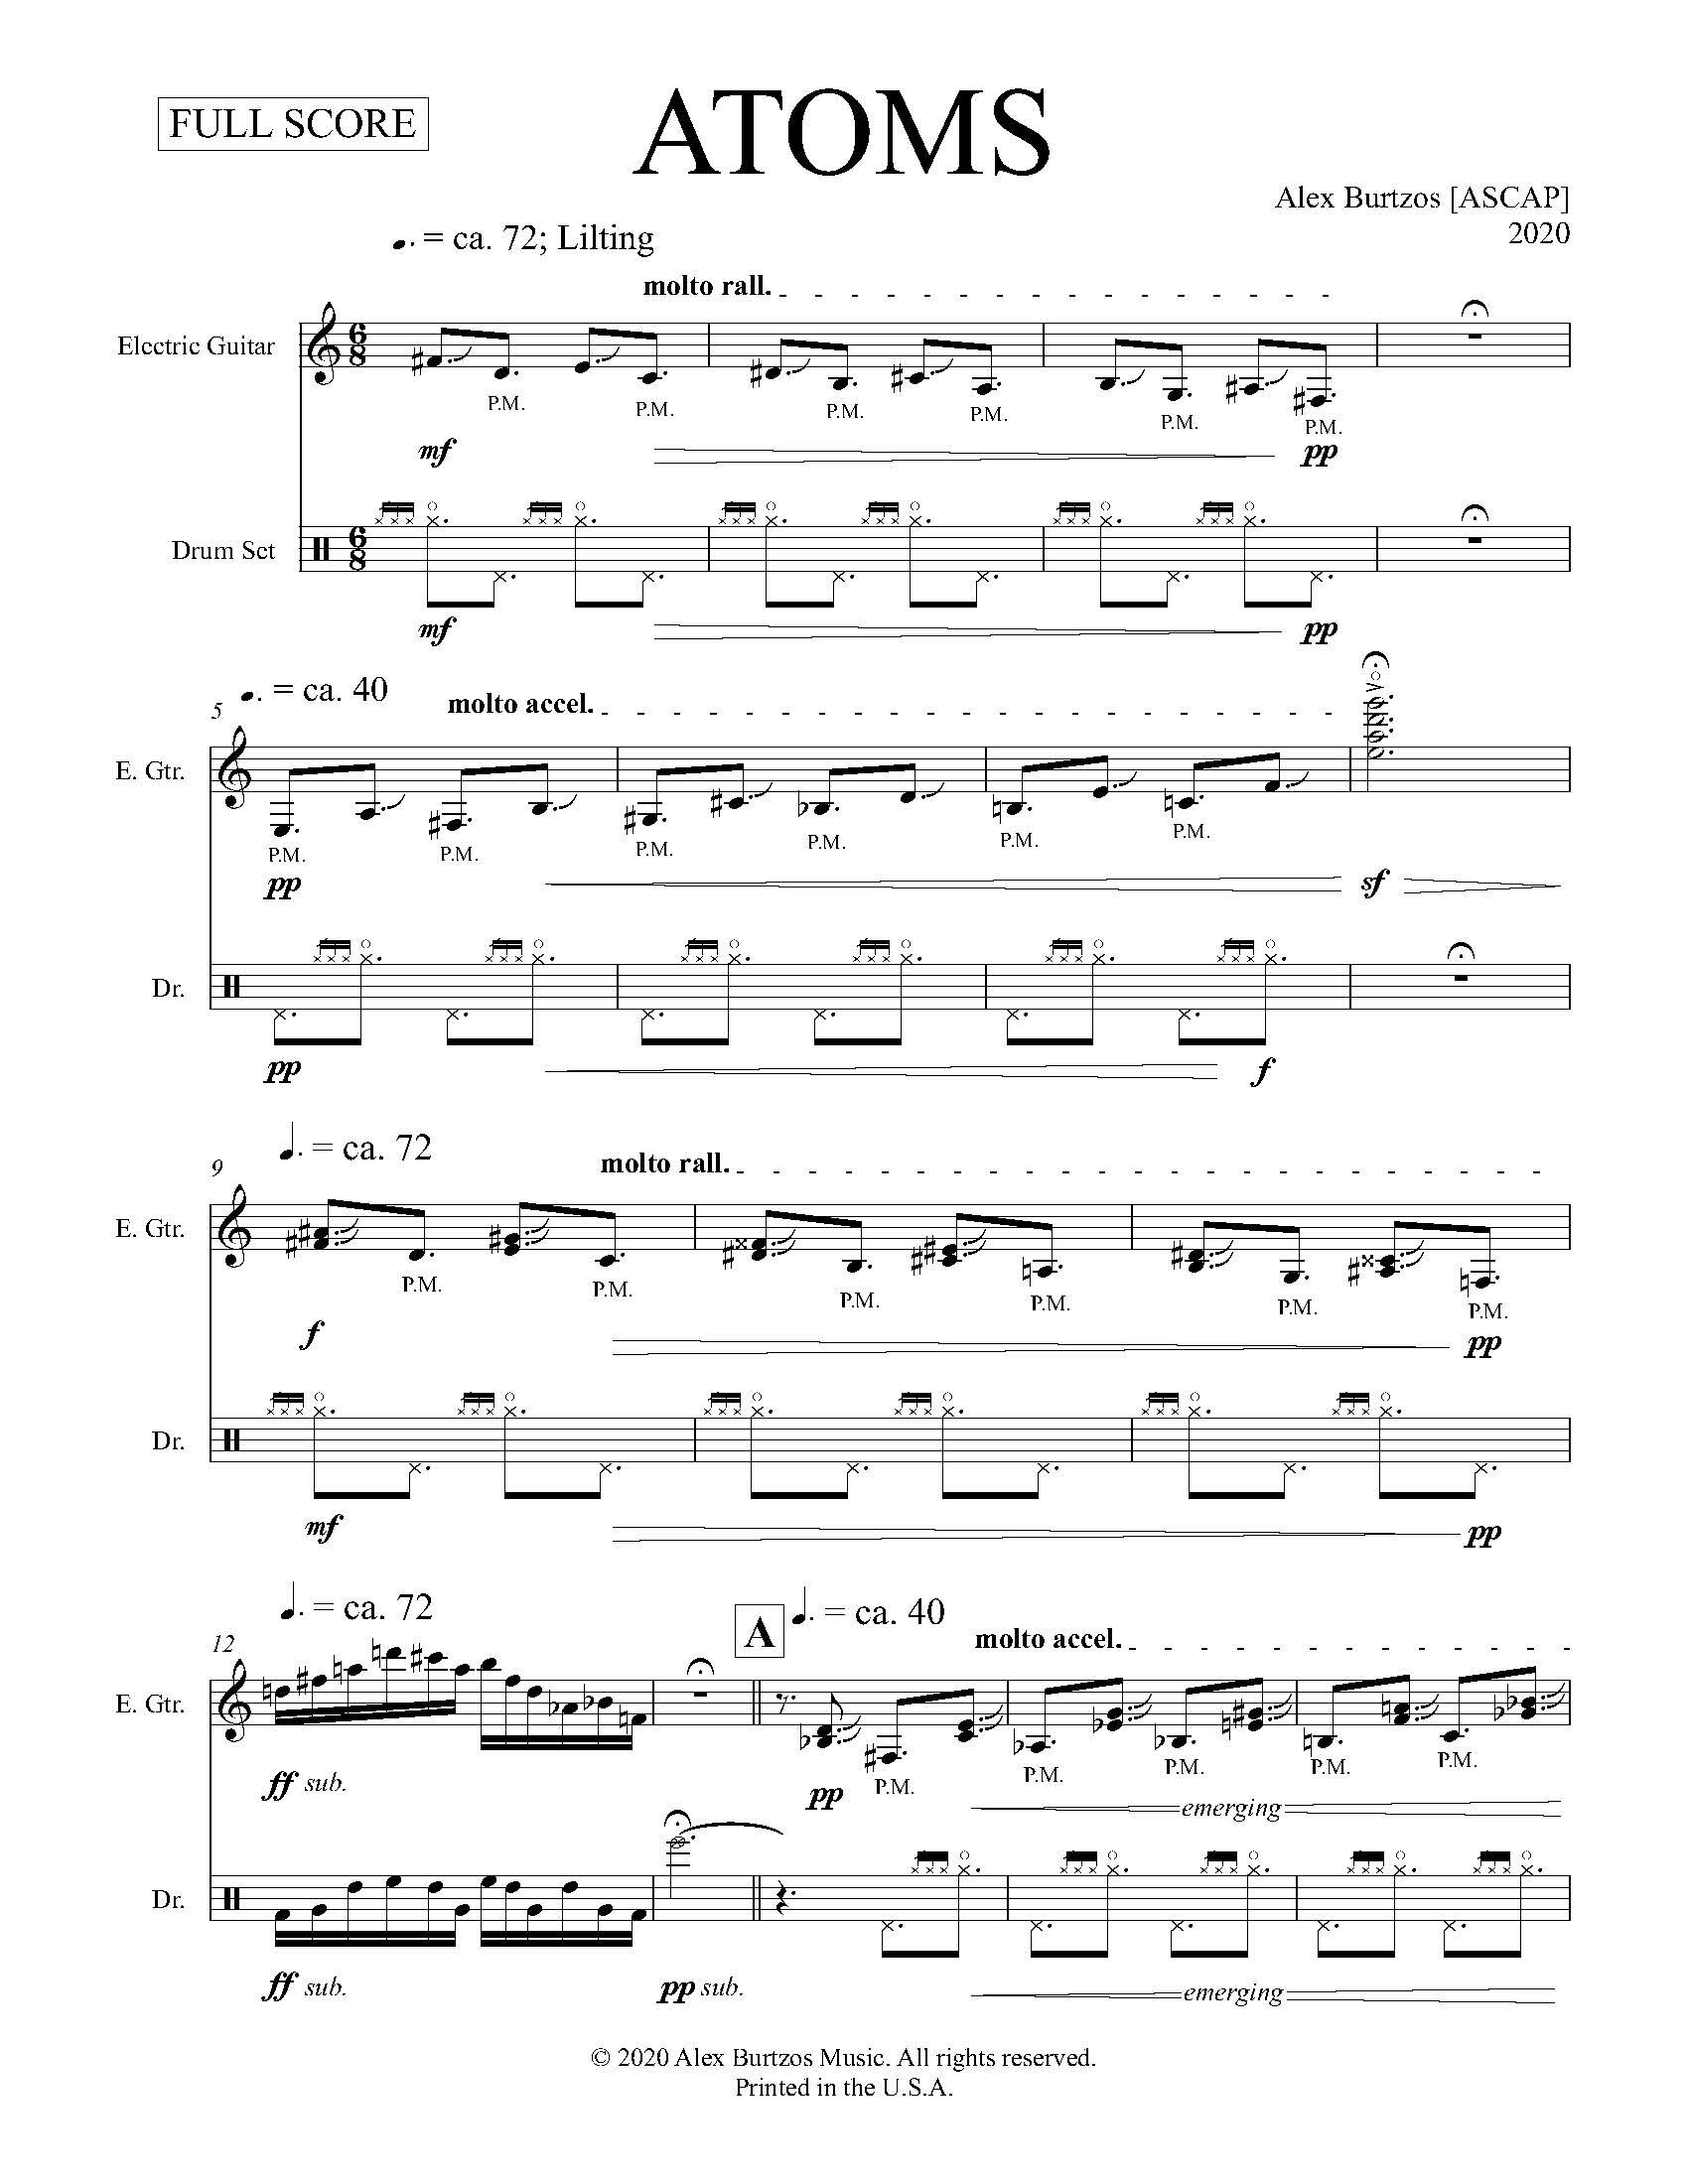 Atoms - Complete Score_Page_07.jpg